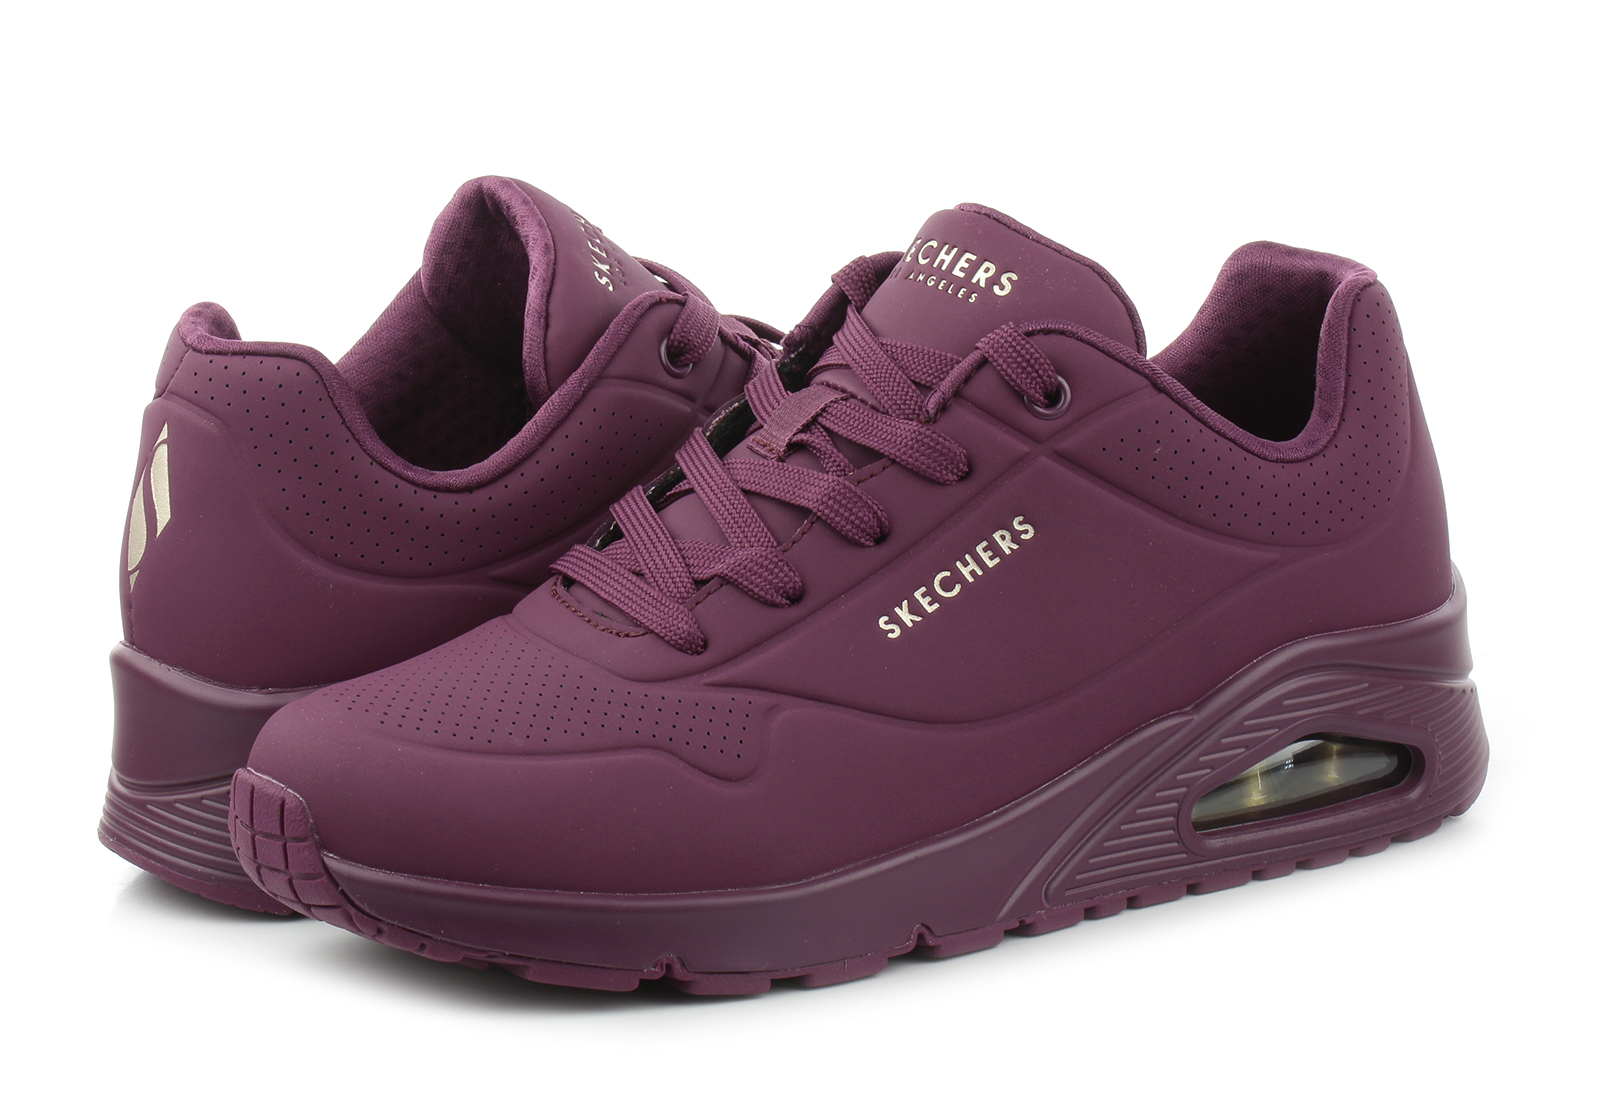 Skechers Sneakers - Uno - Stand On Air - 73690-PLUM - Online shop for  sneakers, shoes and boots